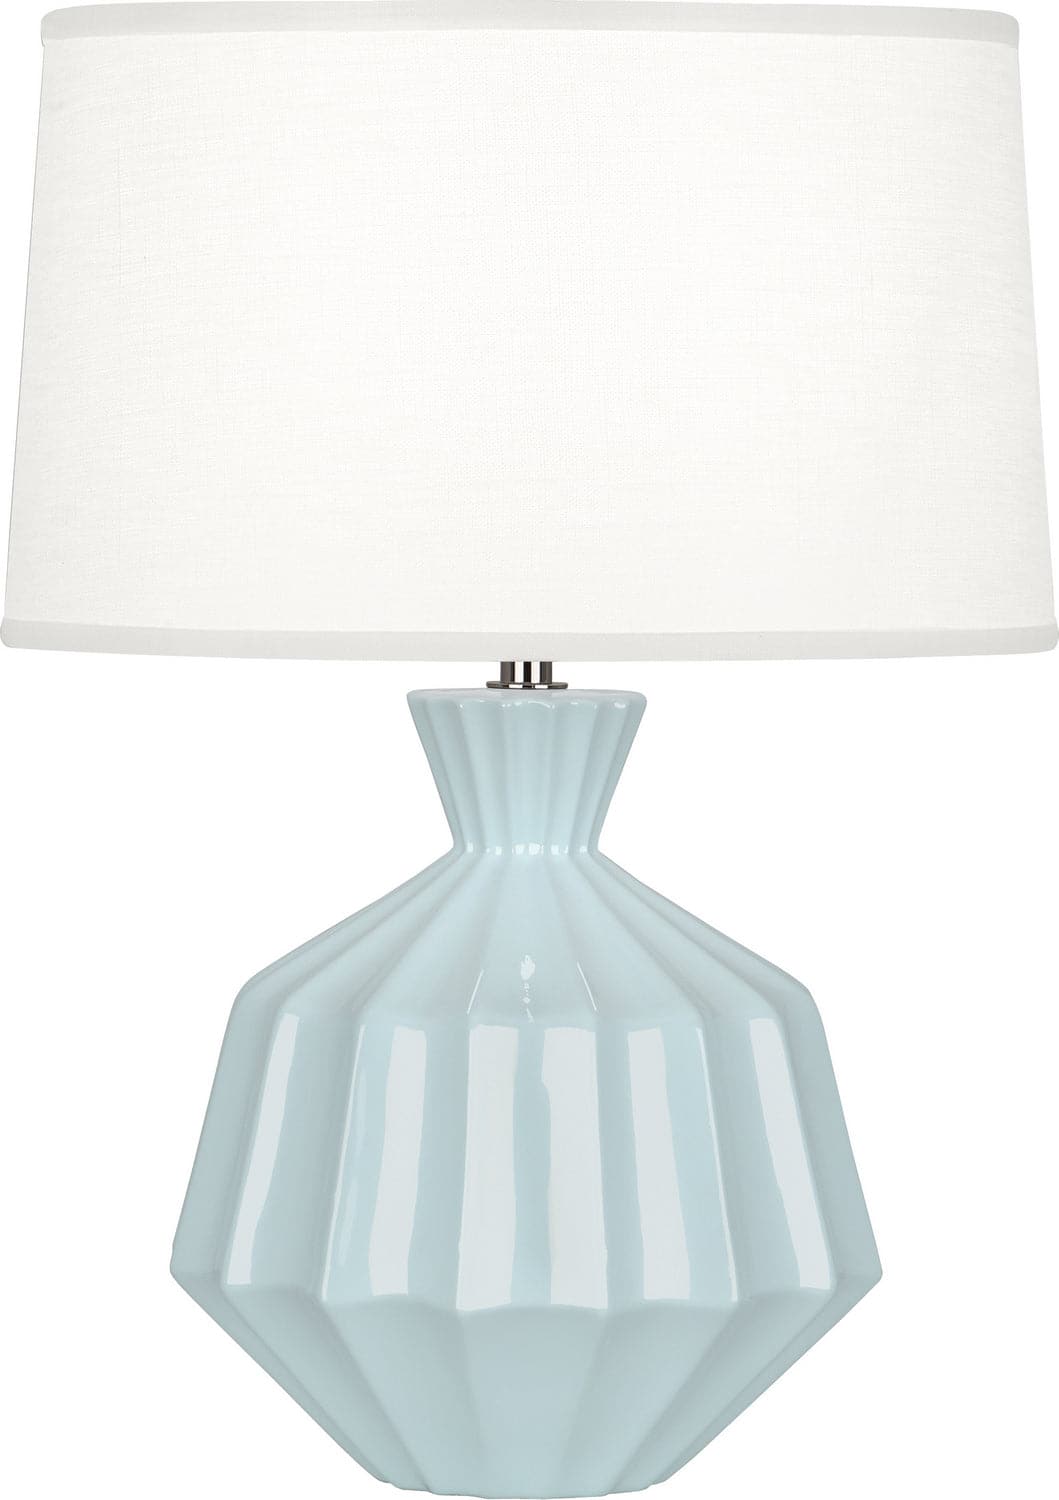 Robert Abbey - BB989 - One Light Accent Lamp - Orion - Baby Blue Glazed